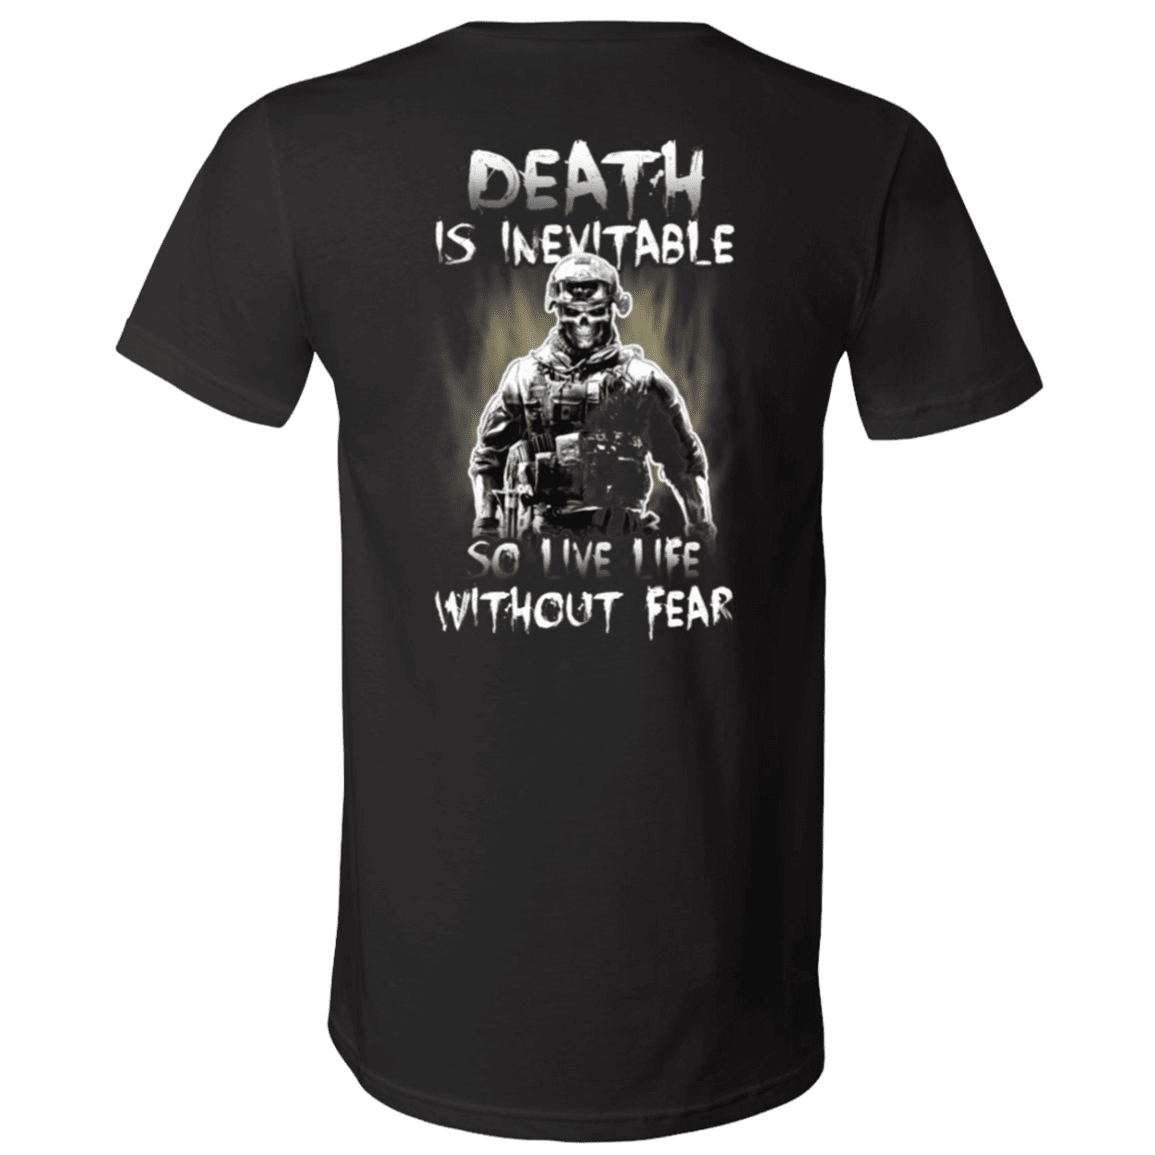 Military T-Shirt "Veteran - Death is Inevitable so I Have Life Without Fear" - Men Back-TShirt-General-Veterans Nation